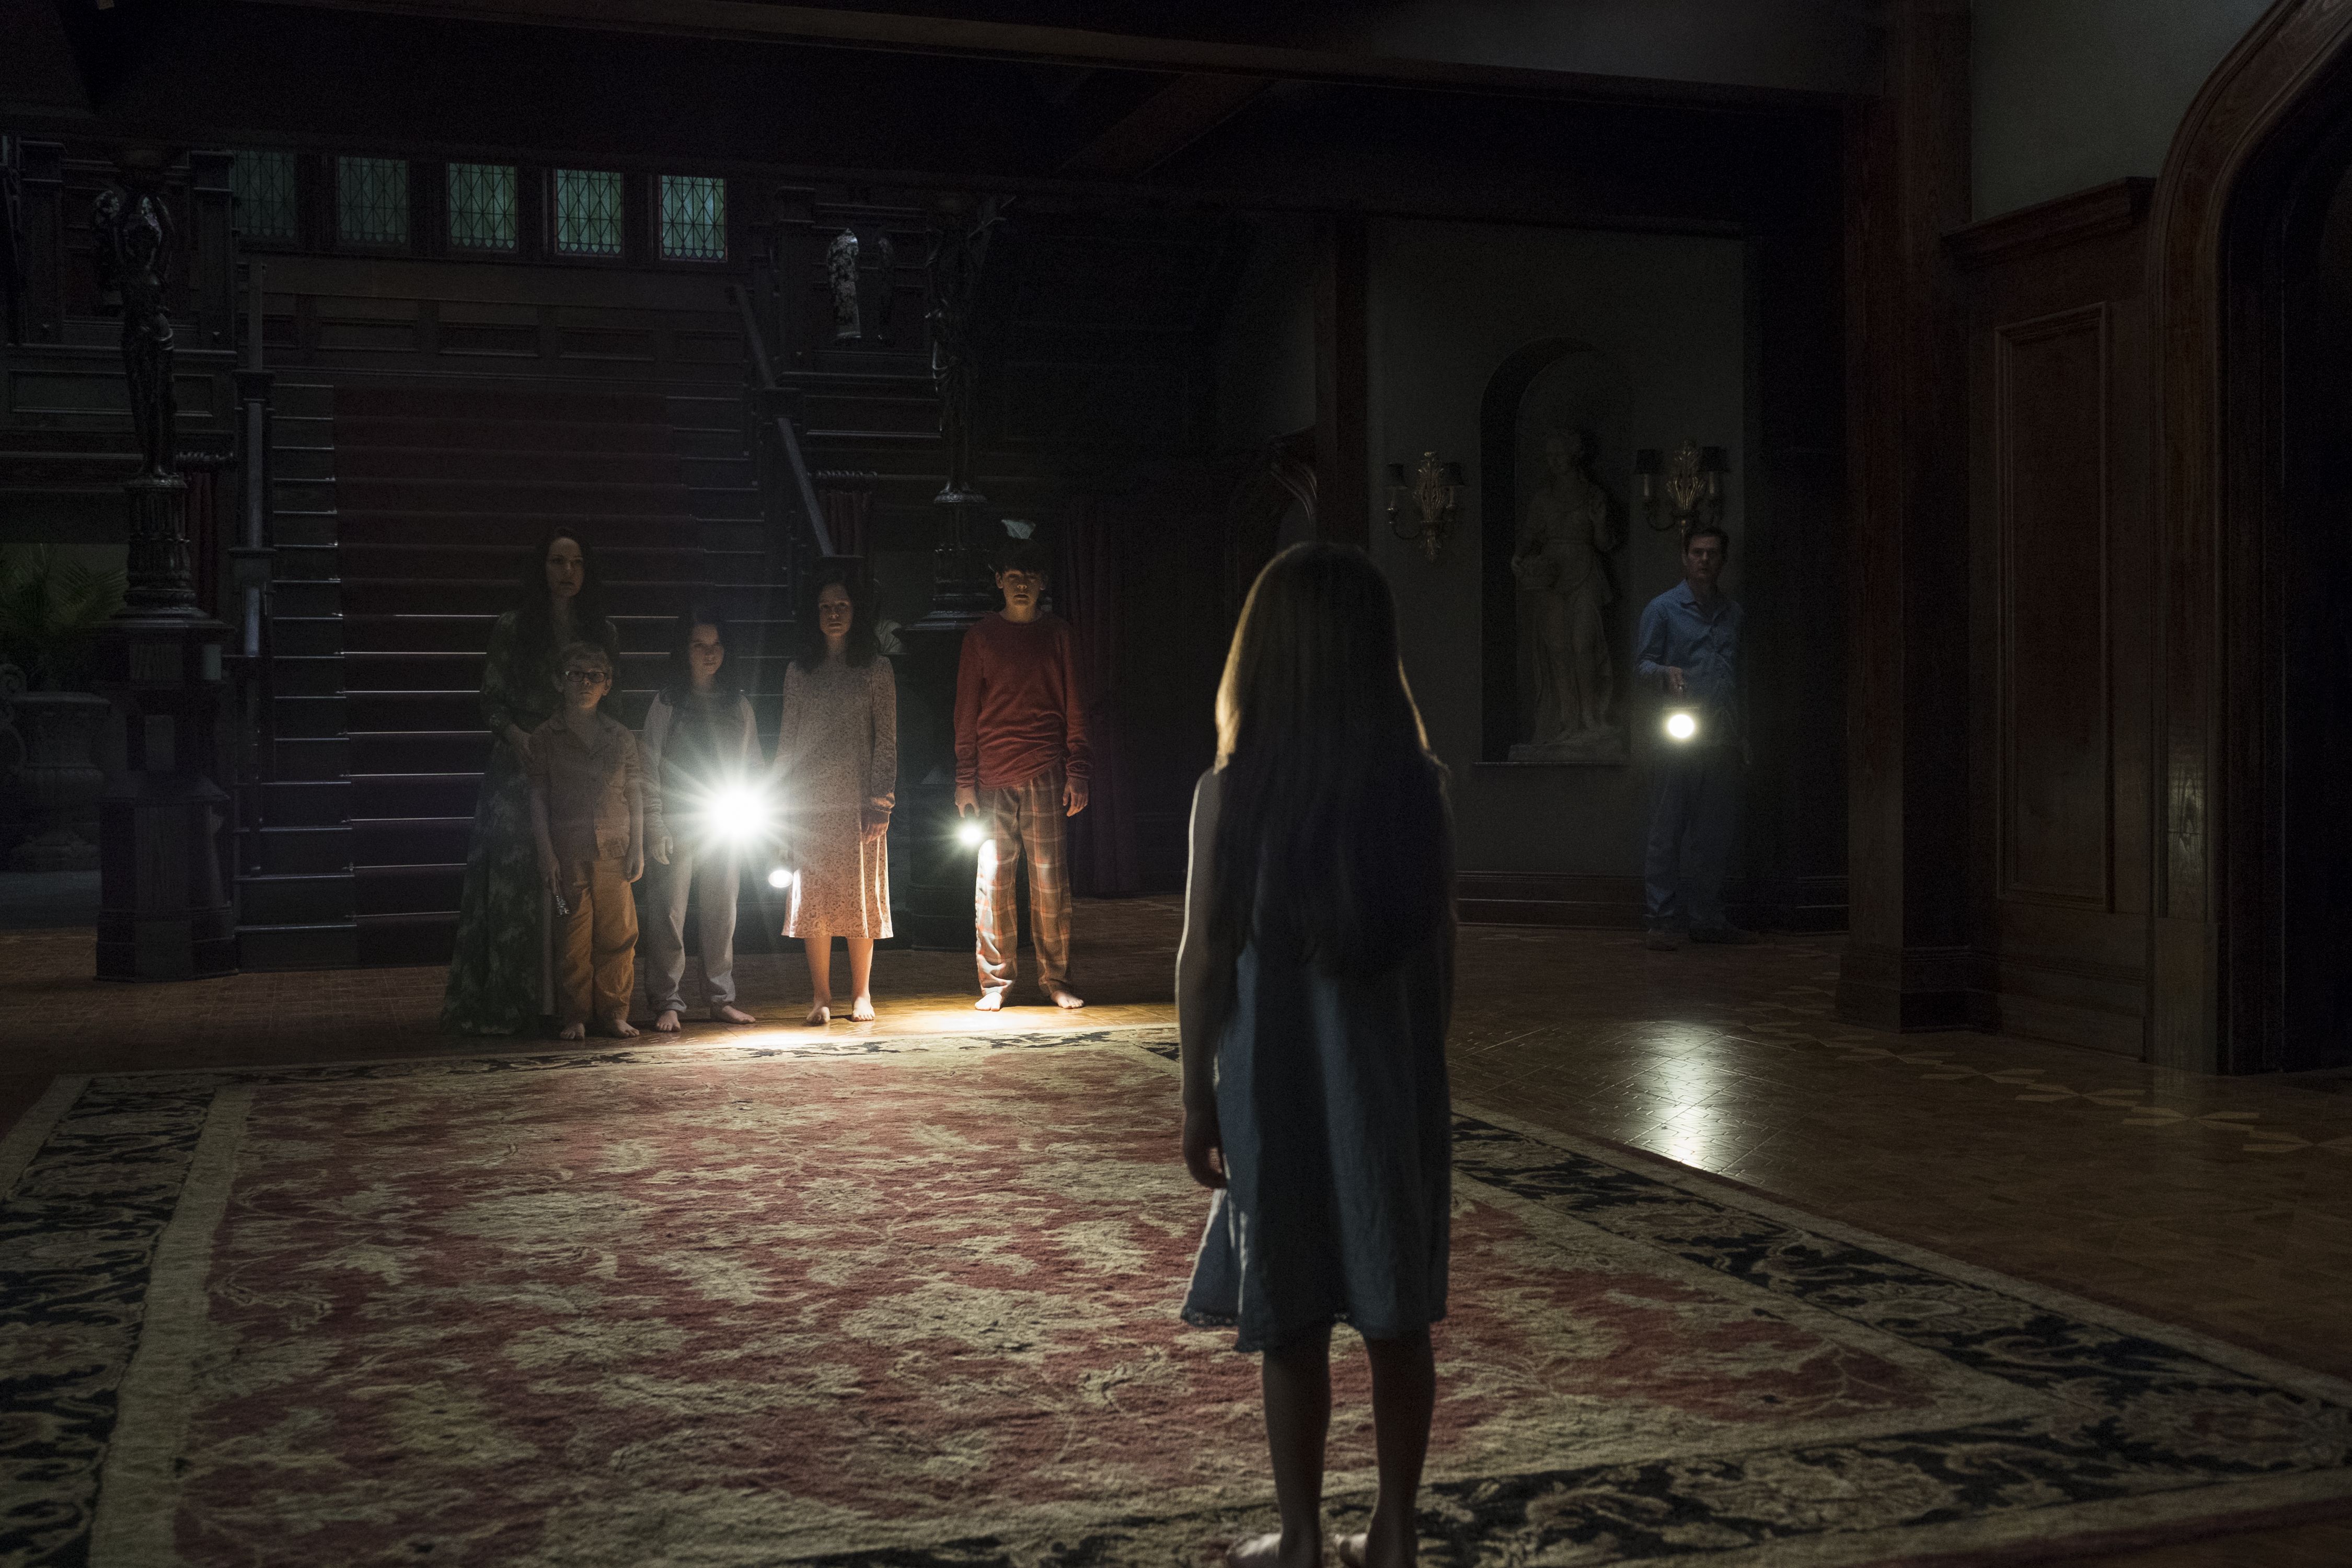 Grief and Trauma Are the Lurking Horrors in “The Haunting of Hill House”